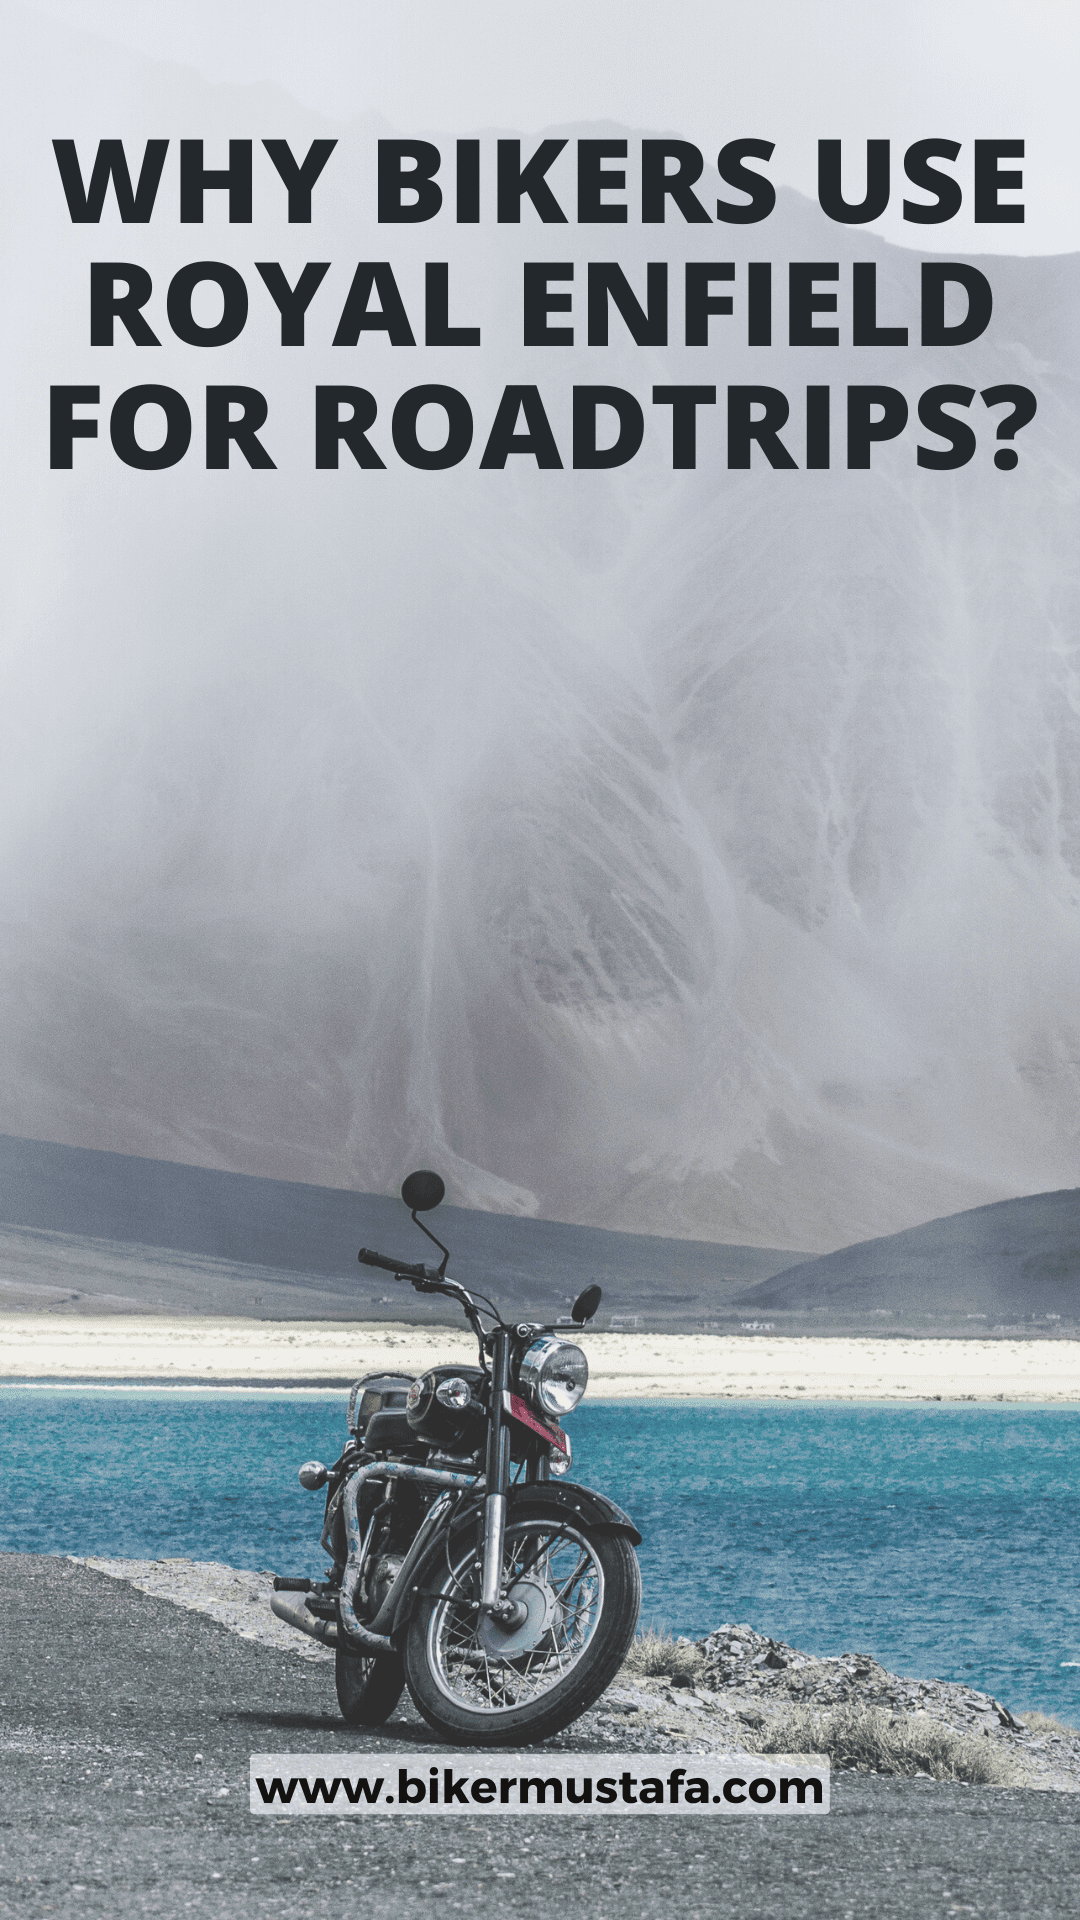 Why Bikers Use Royal Enfield For Roadtrips?